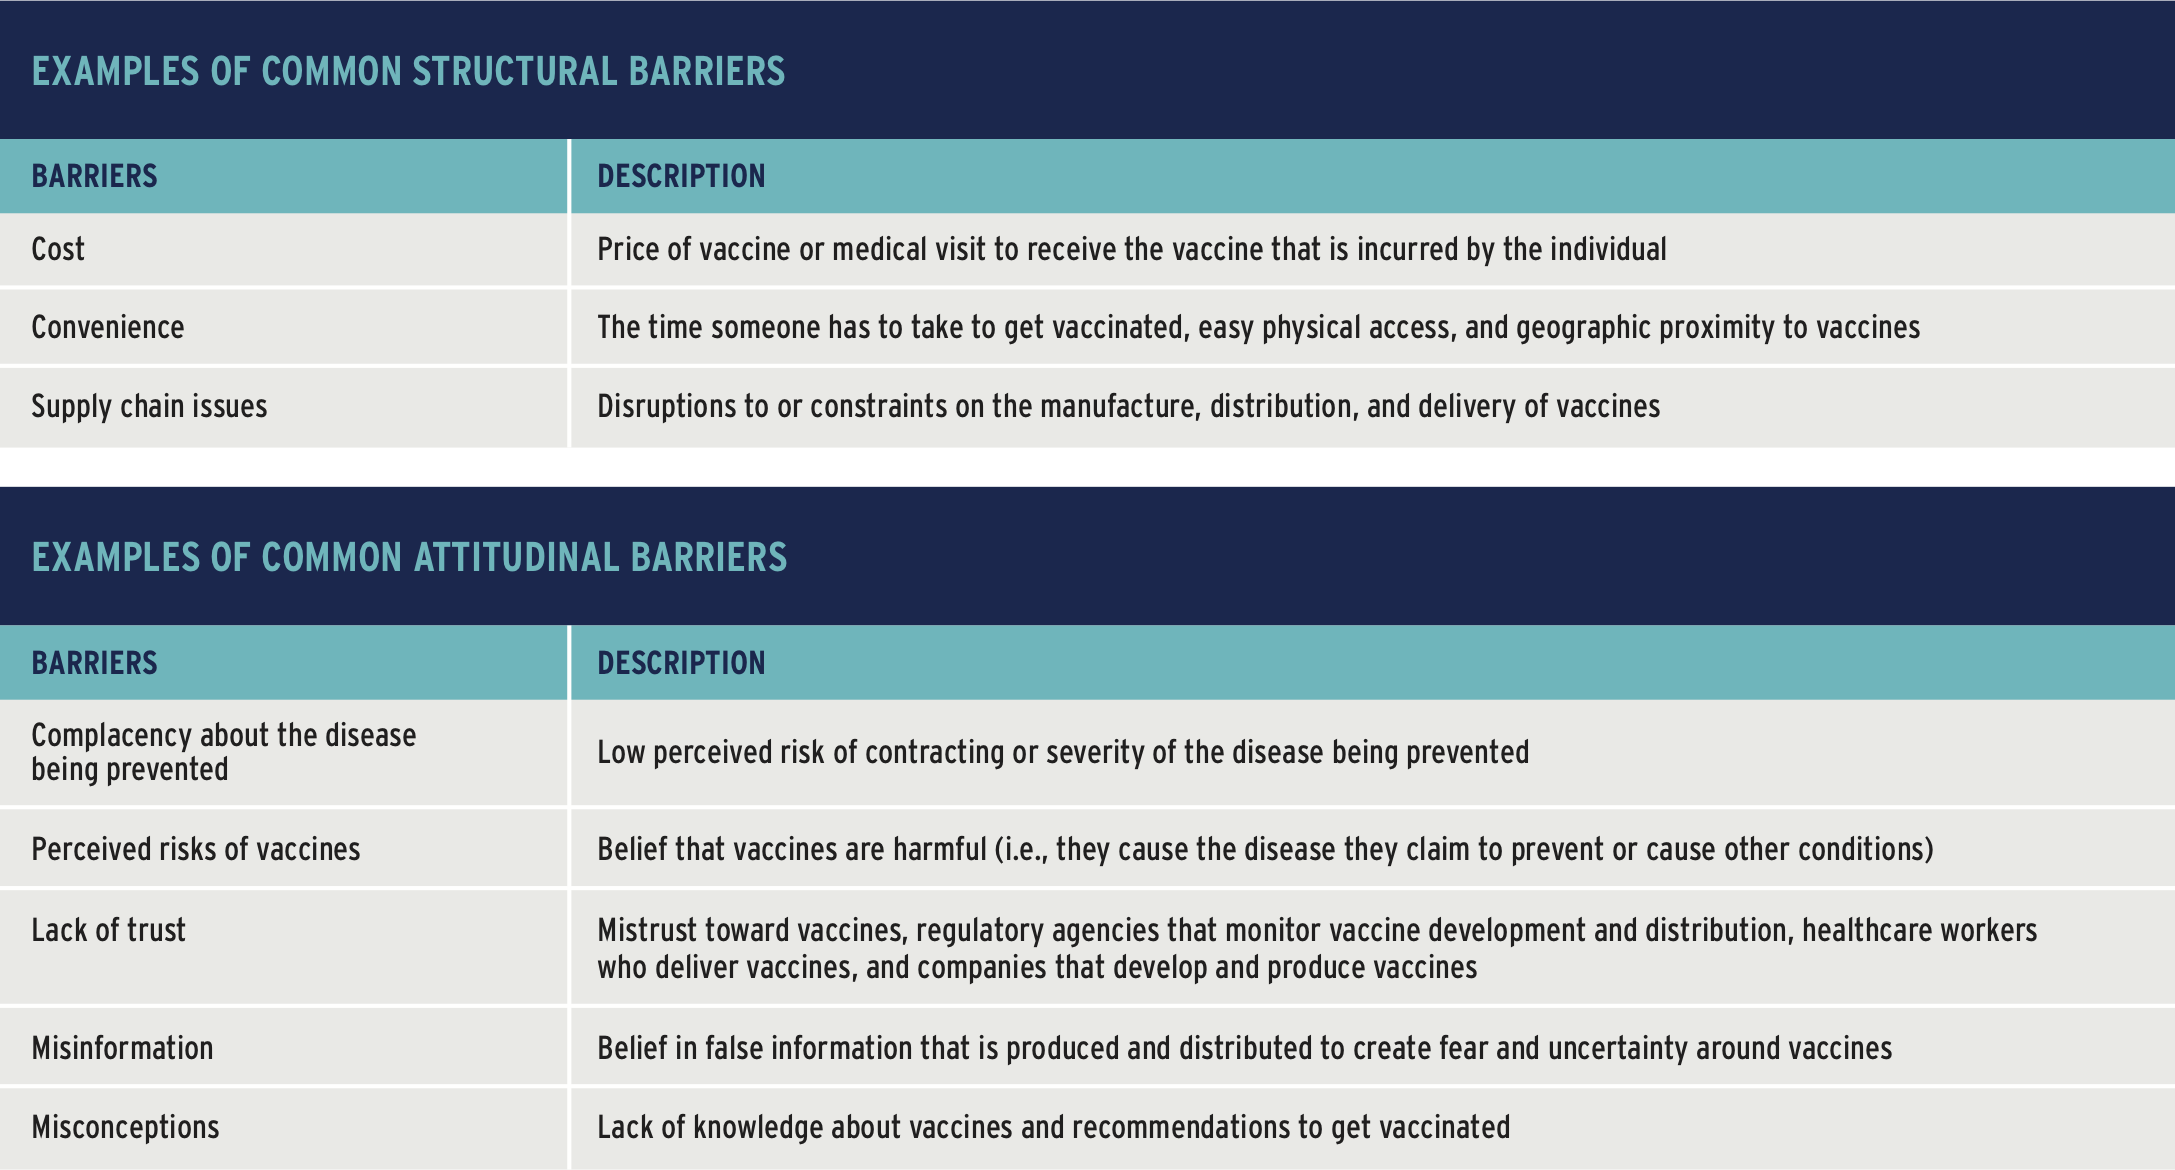 Potential barriers to vaccination including examples of common structural barriers and common attitudinal barriers.